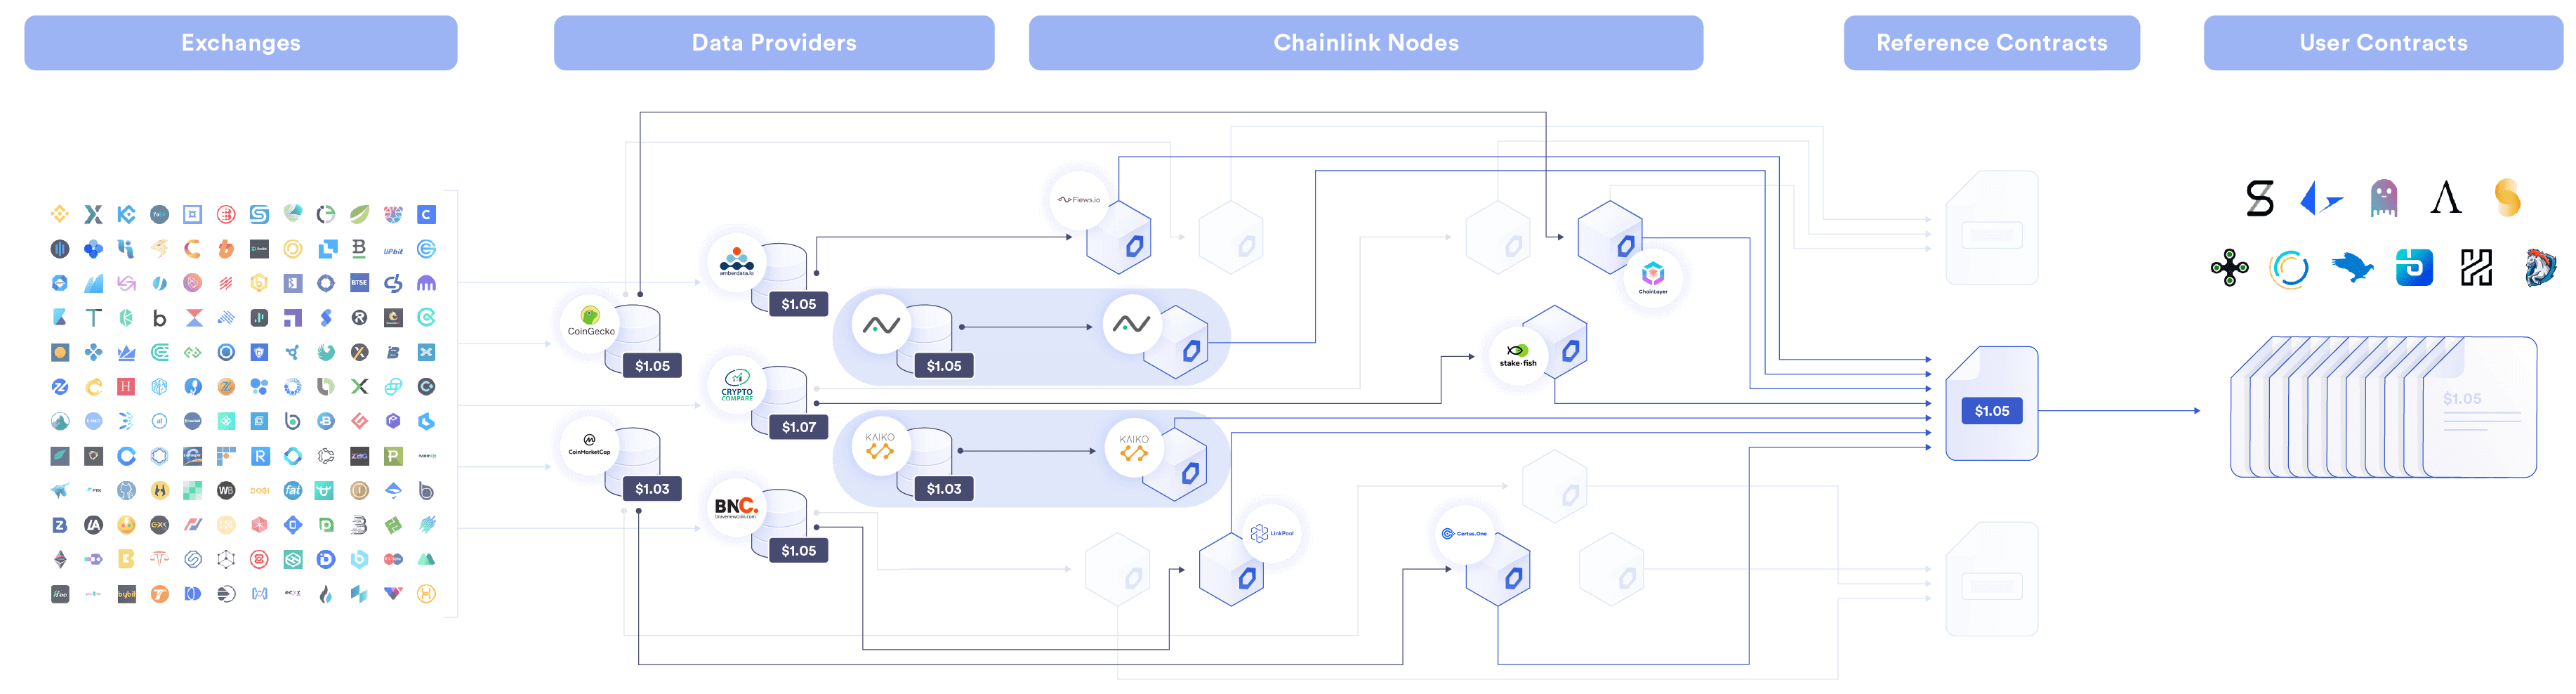 Chainlink Data Providers